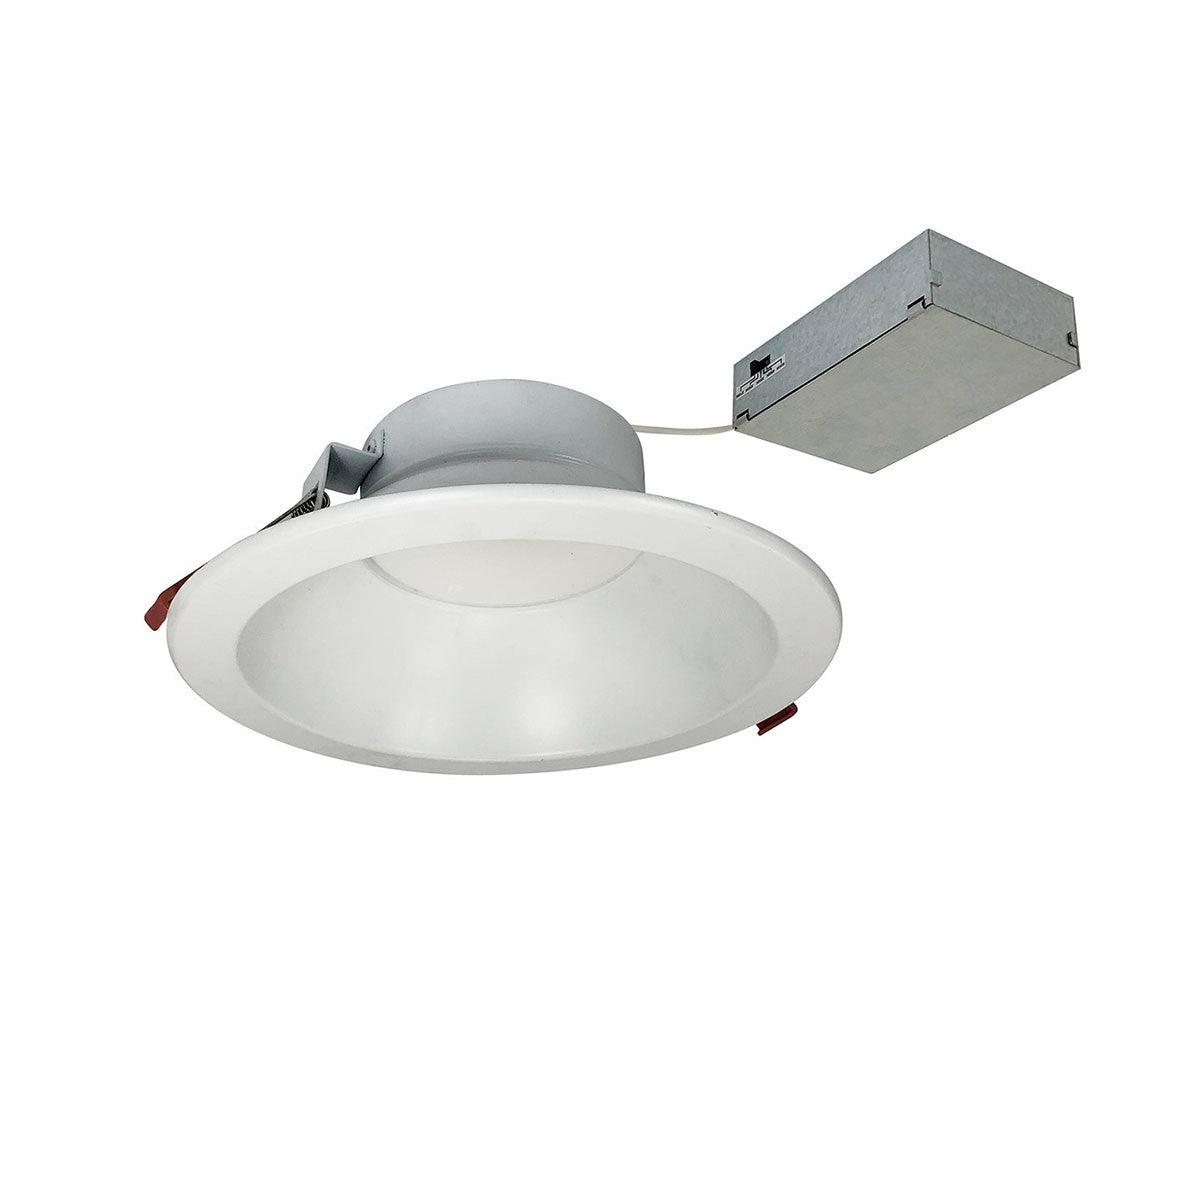 Theia 8 Inch Canless LED Recessed Light, 22 Watt, 2100 Lumens, Selectable CCT, 2700K to 5000K, Matte Powder White Finish